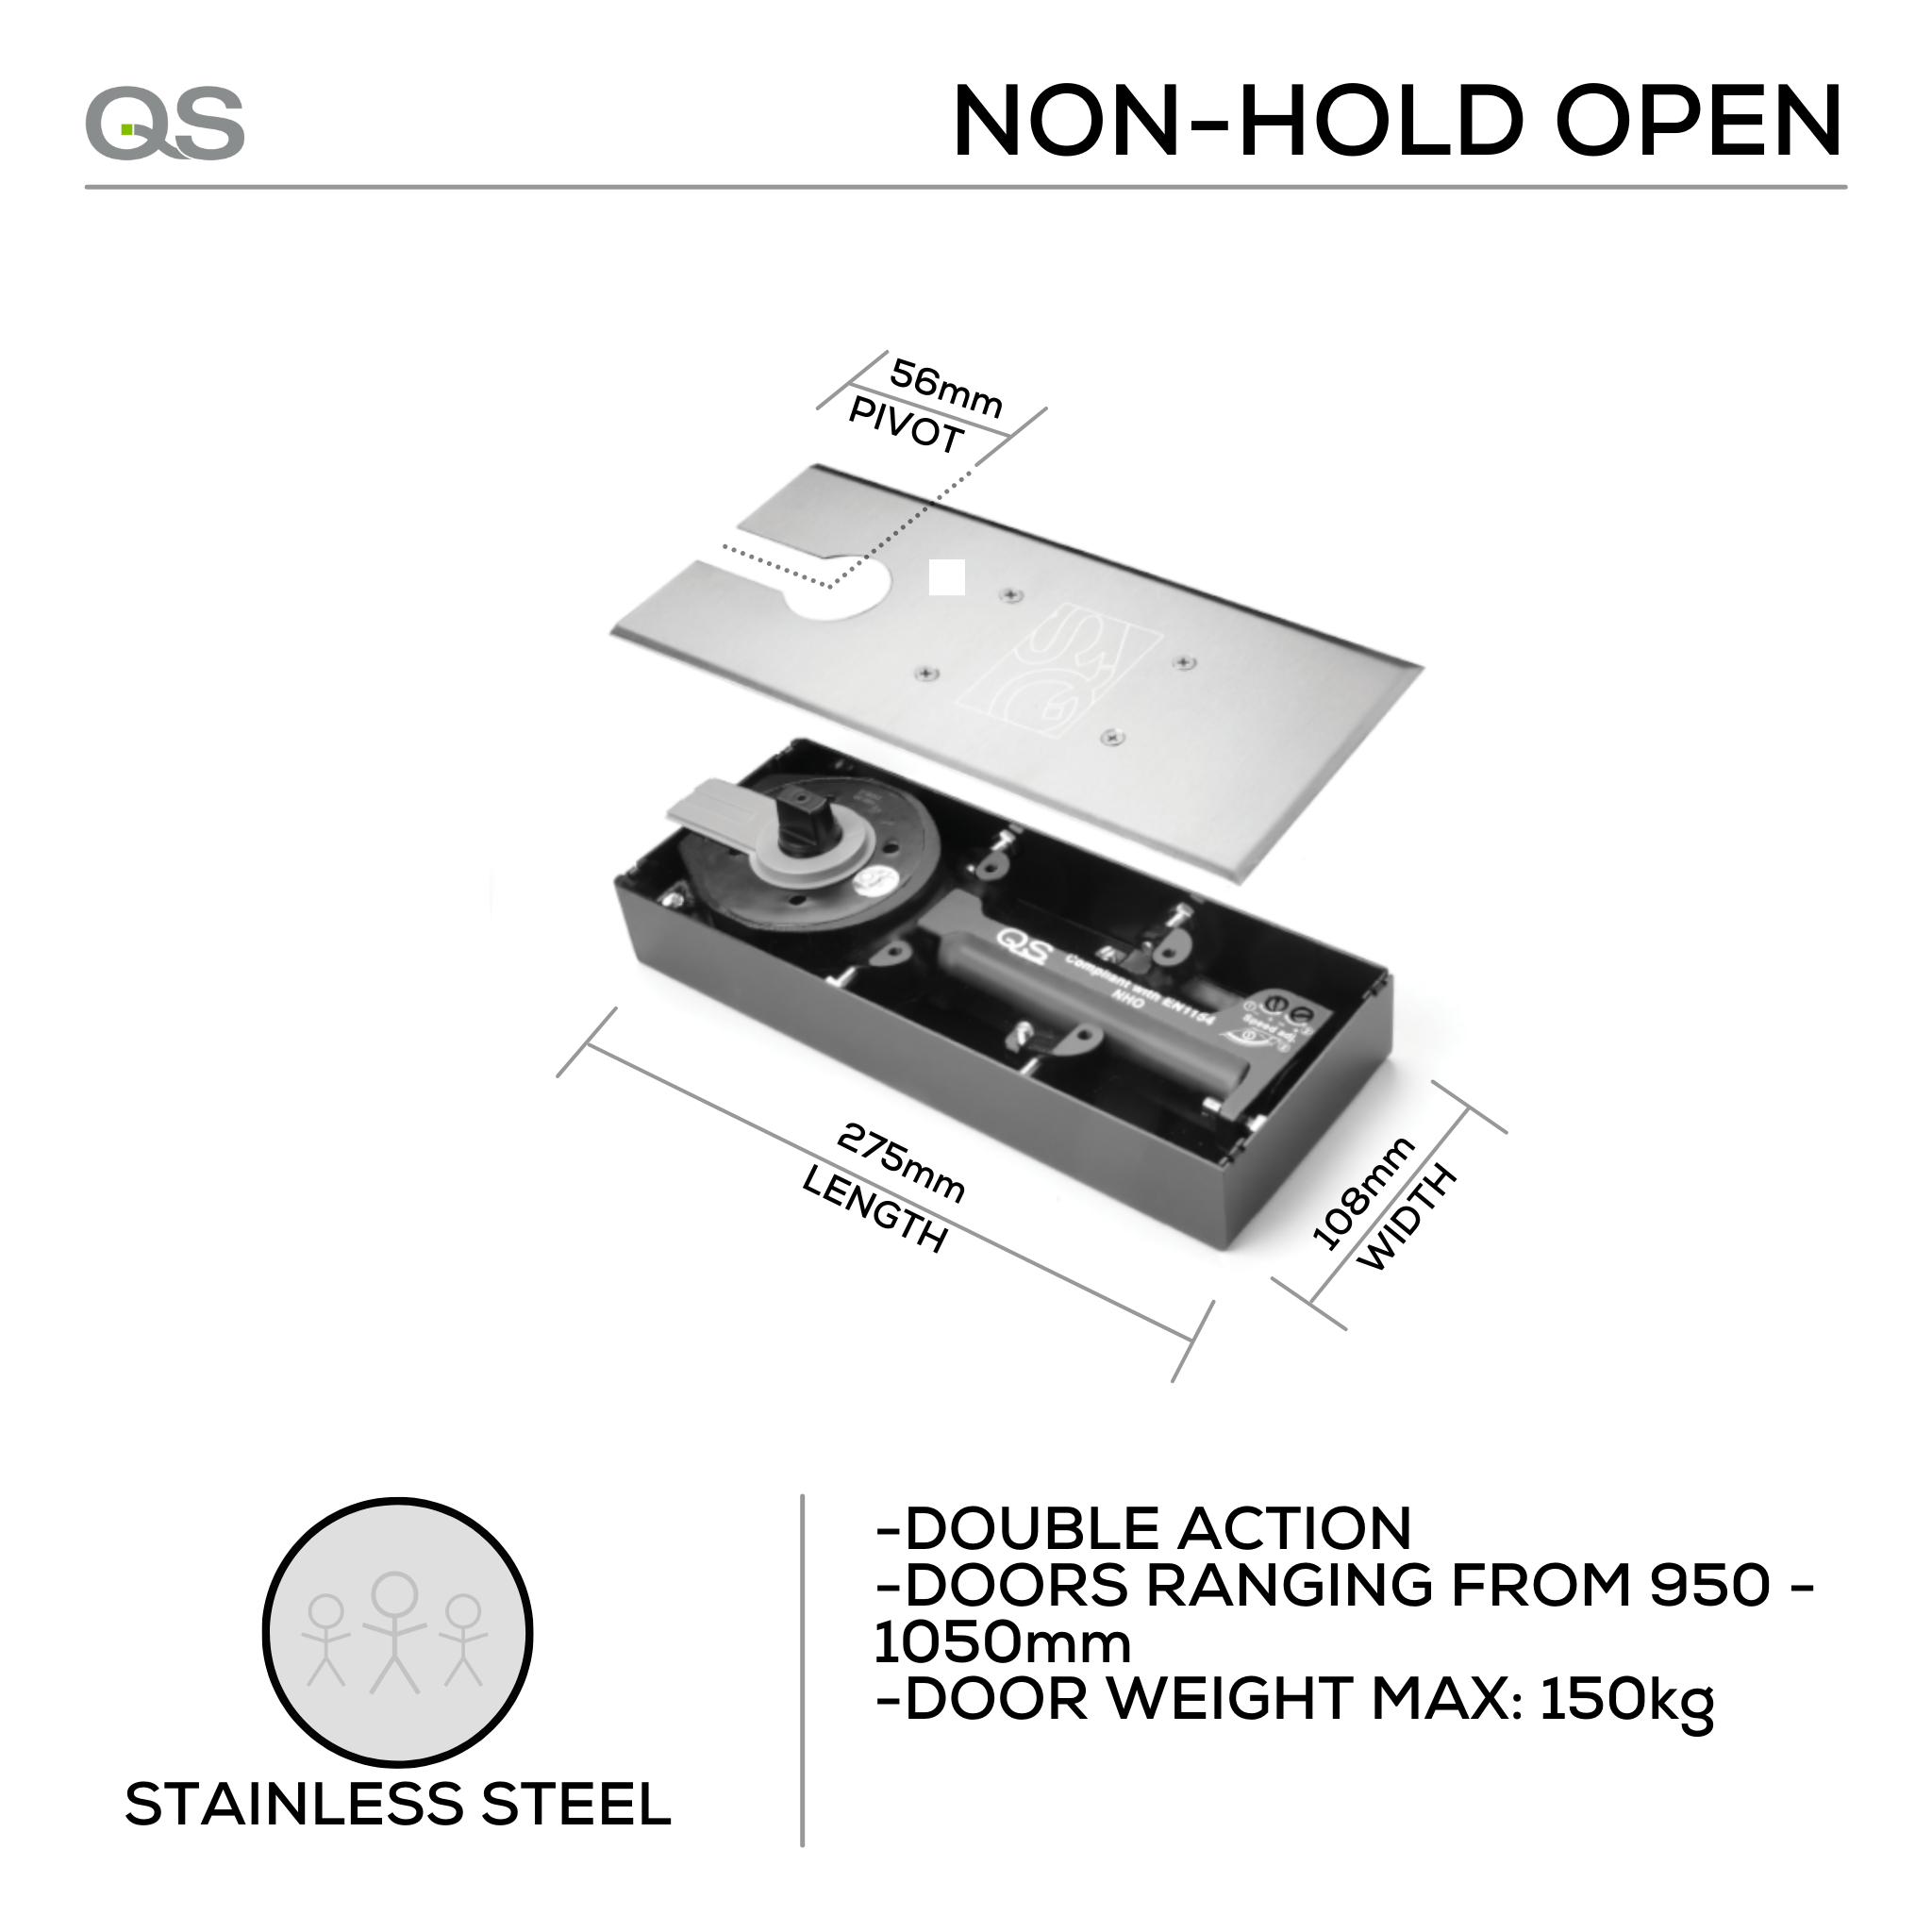 QS880/3 NHO, Floorspring, Double Action, Non-Hold Open, 150mm (kg), 3, Top Centre, Bottom Strap, Stainless Steel, QS